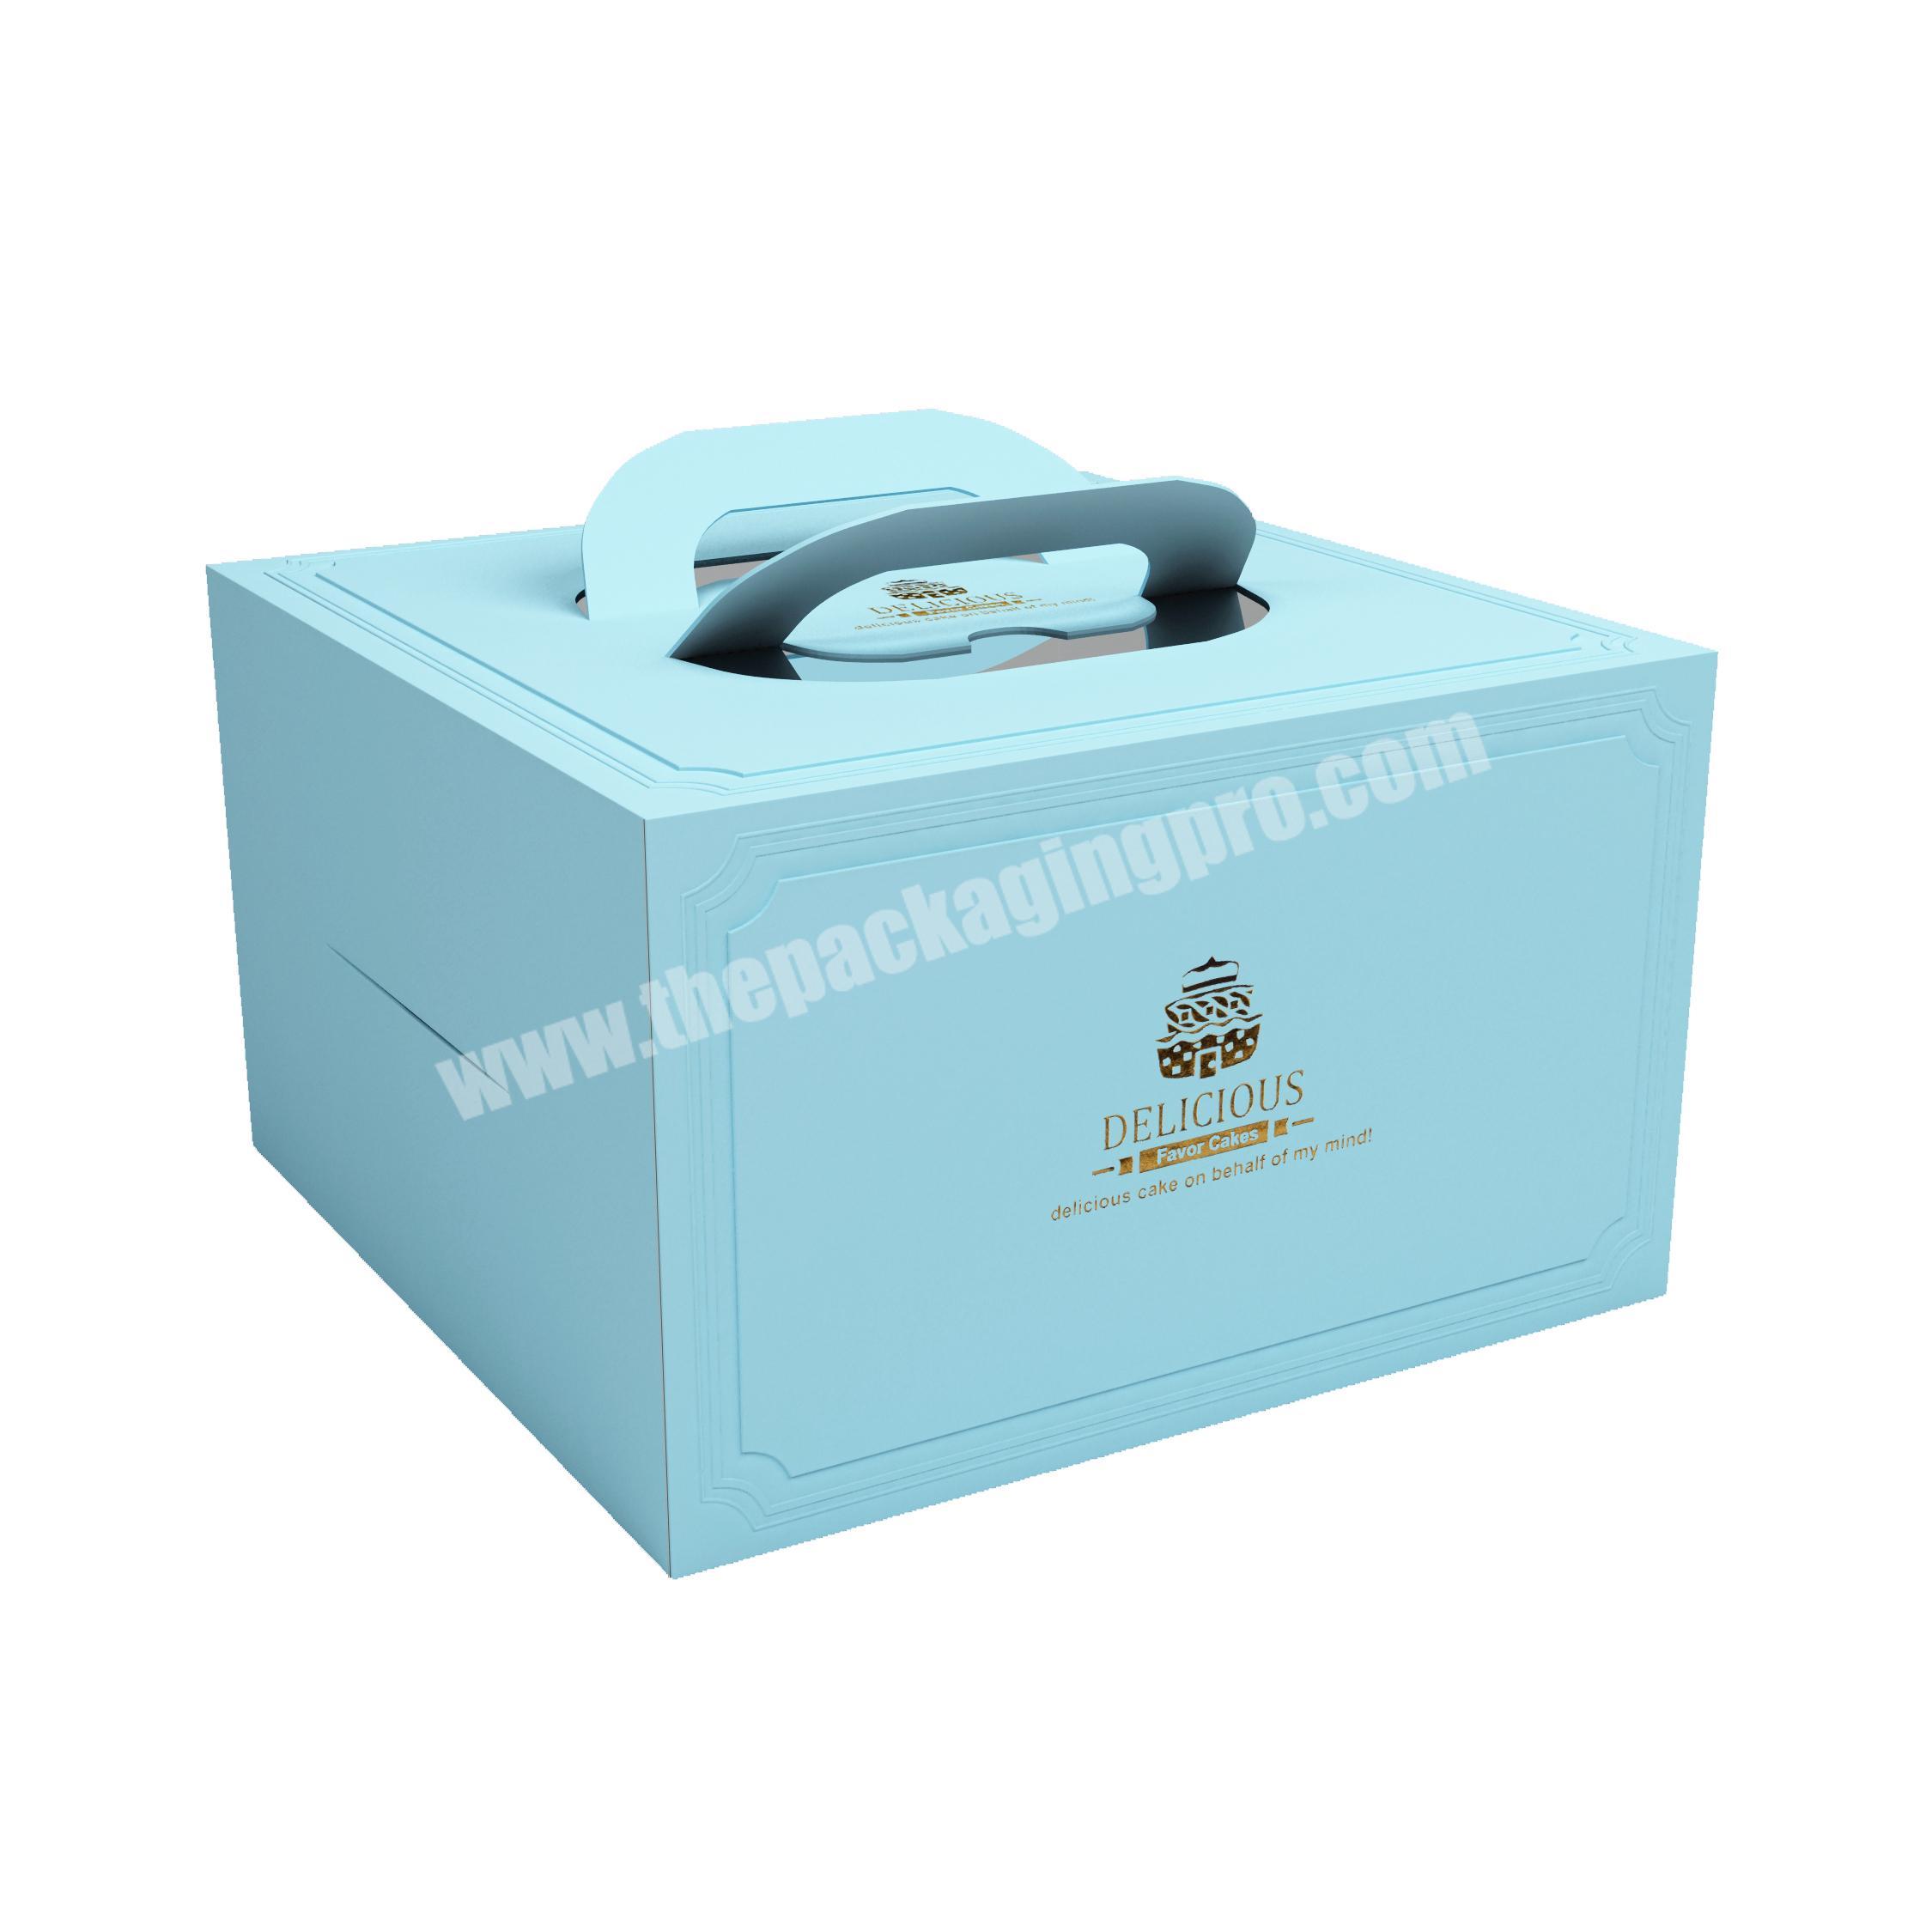 High Quality Black Varnishing Moon Window Custom Design Box Food Grade Disposable Cake To Go Paper Packaging Boxes